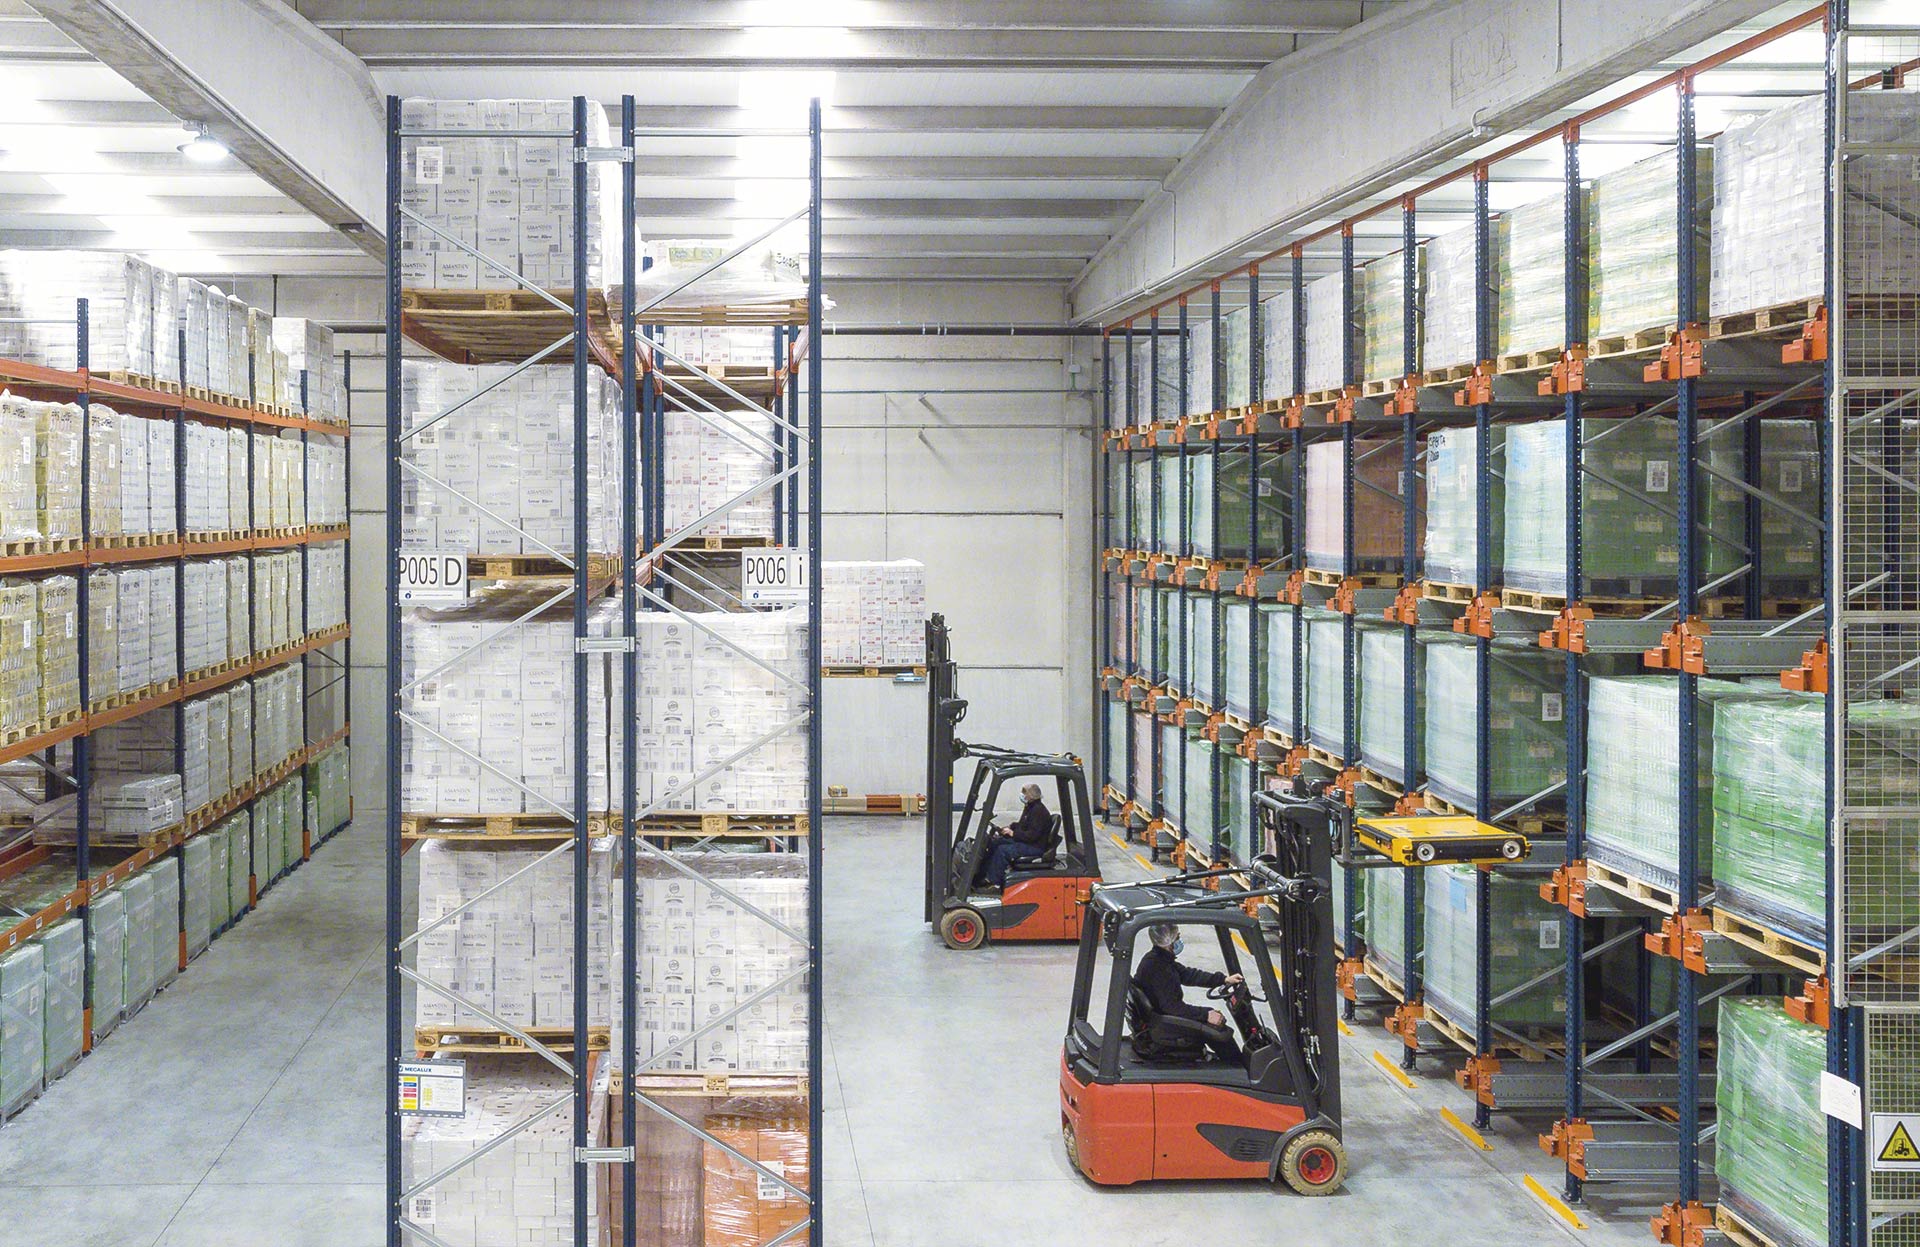 The Pallet Shuttle storage system can be combined with adjustable pallet racking